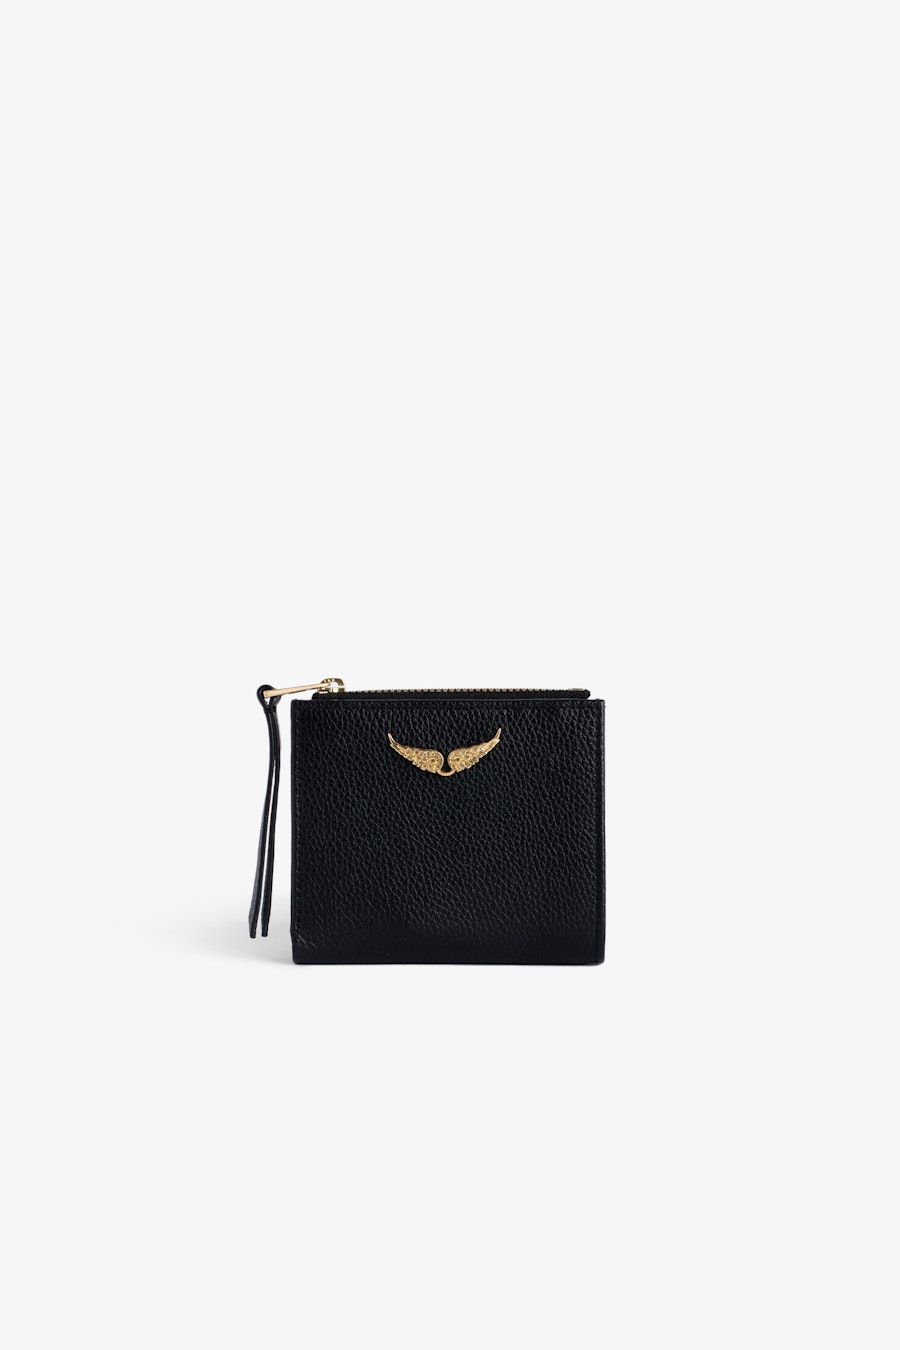 ZADIG&VOLTAIRE ZV Fold Coin Purse